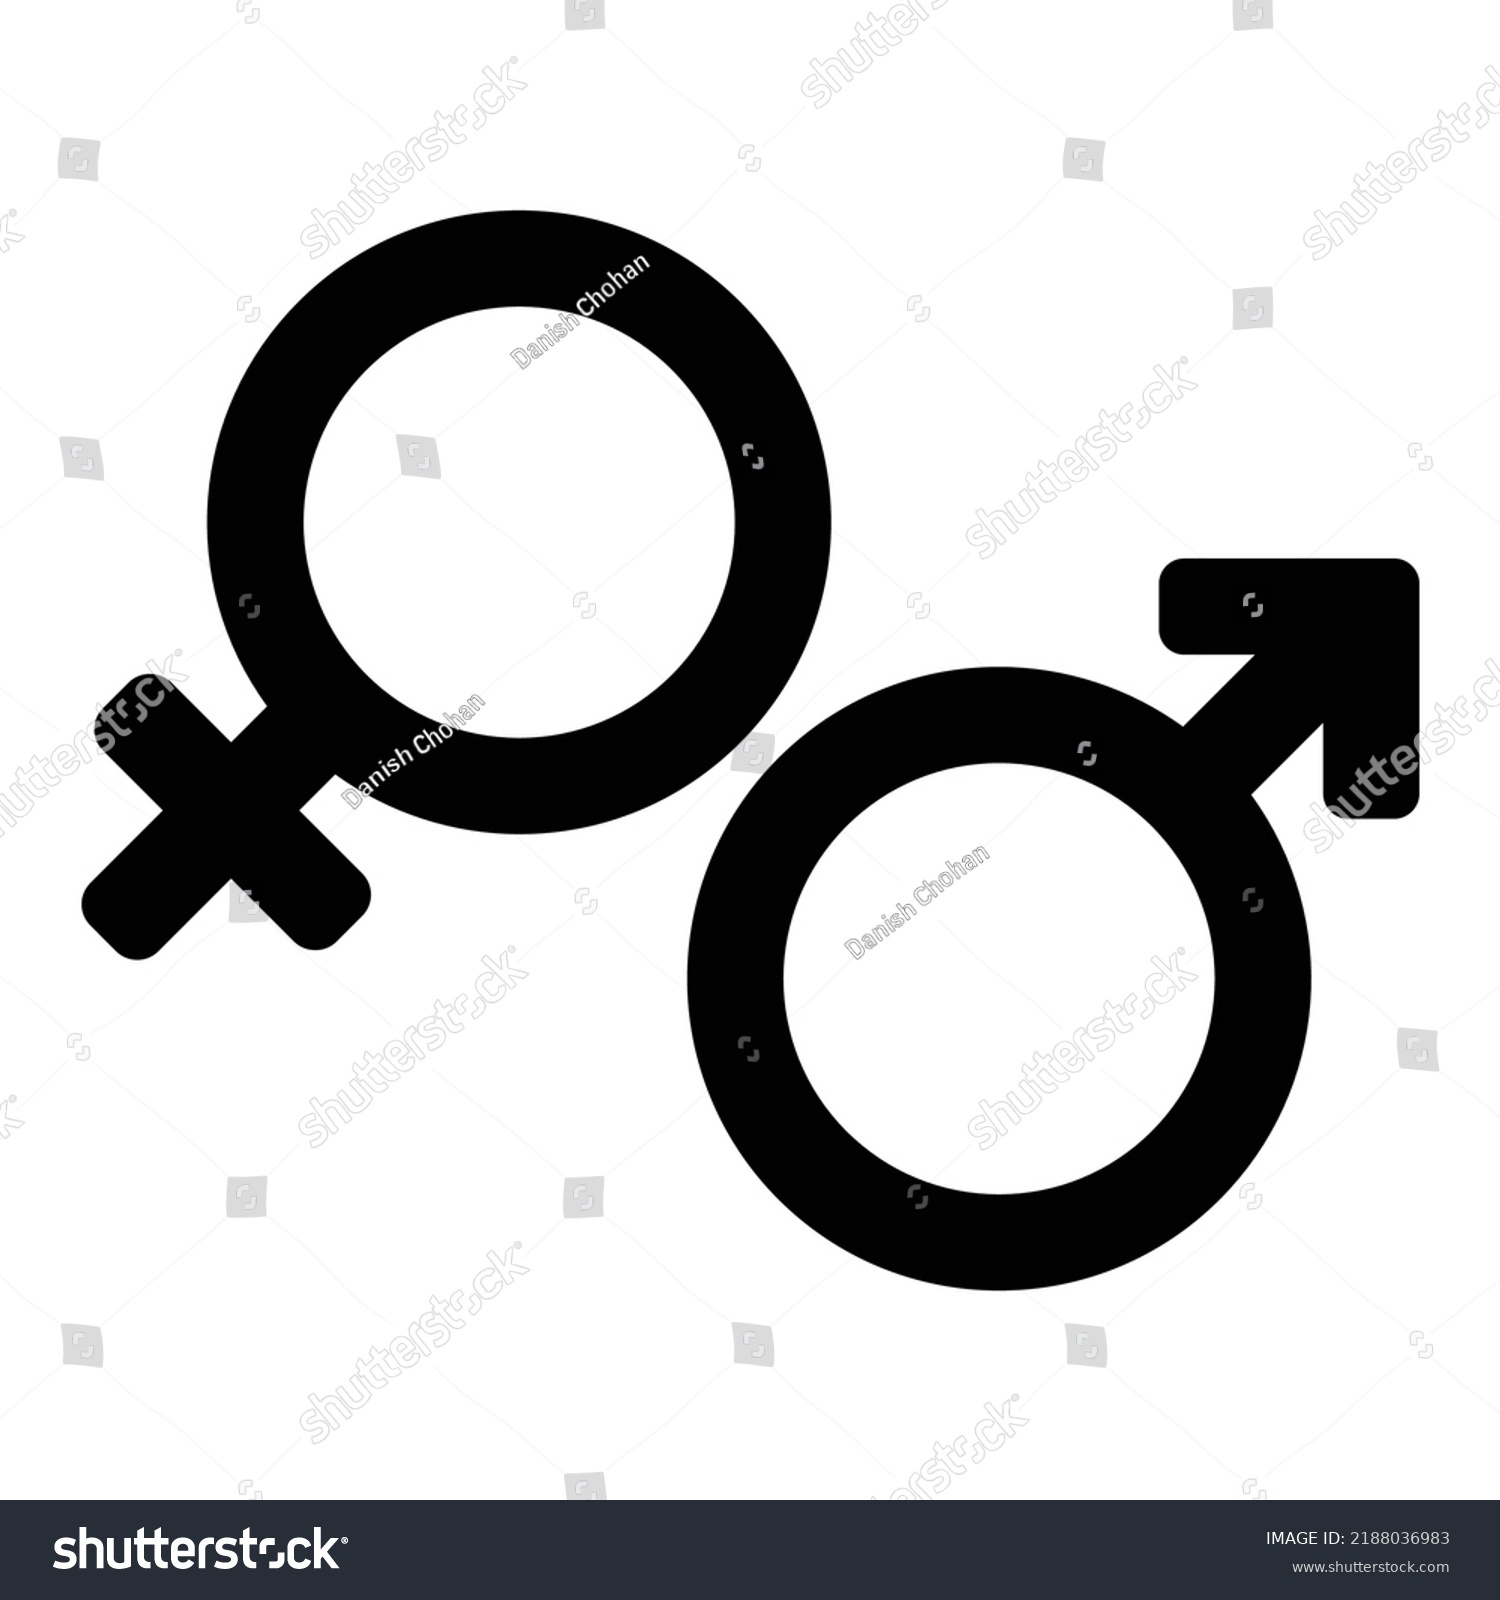 Sex Male Female Gender Vector Icon Stock Vector Royalty Free 2188036983 Shutterstock 5454